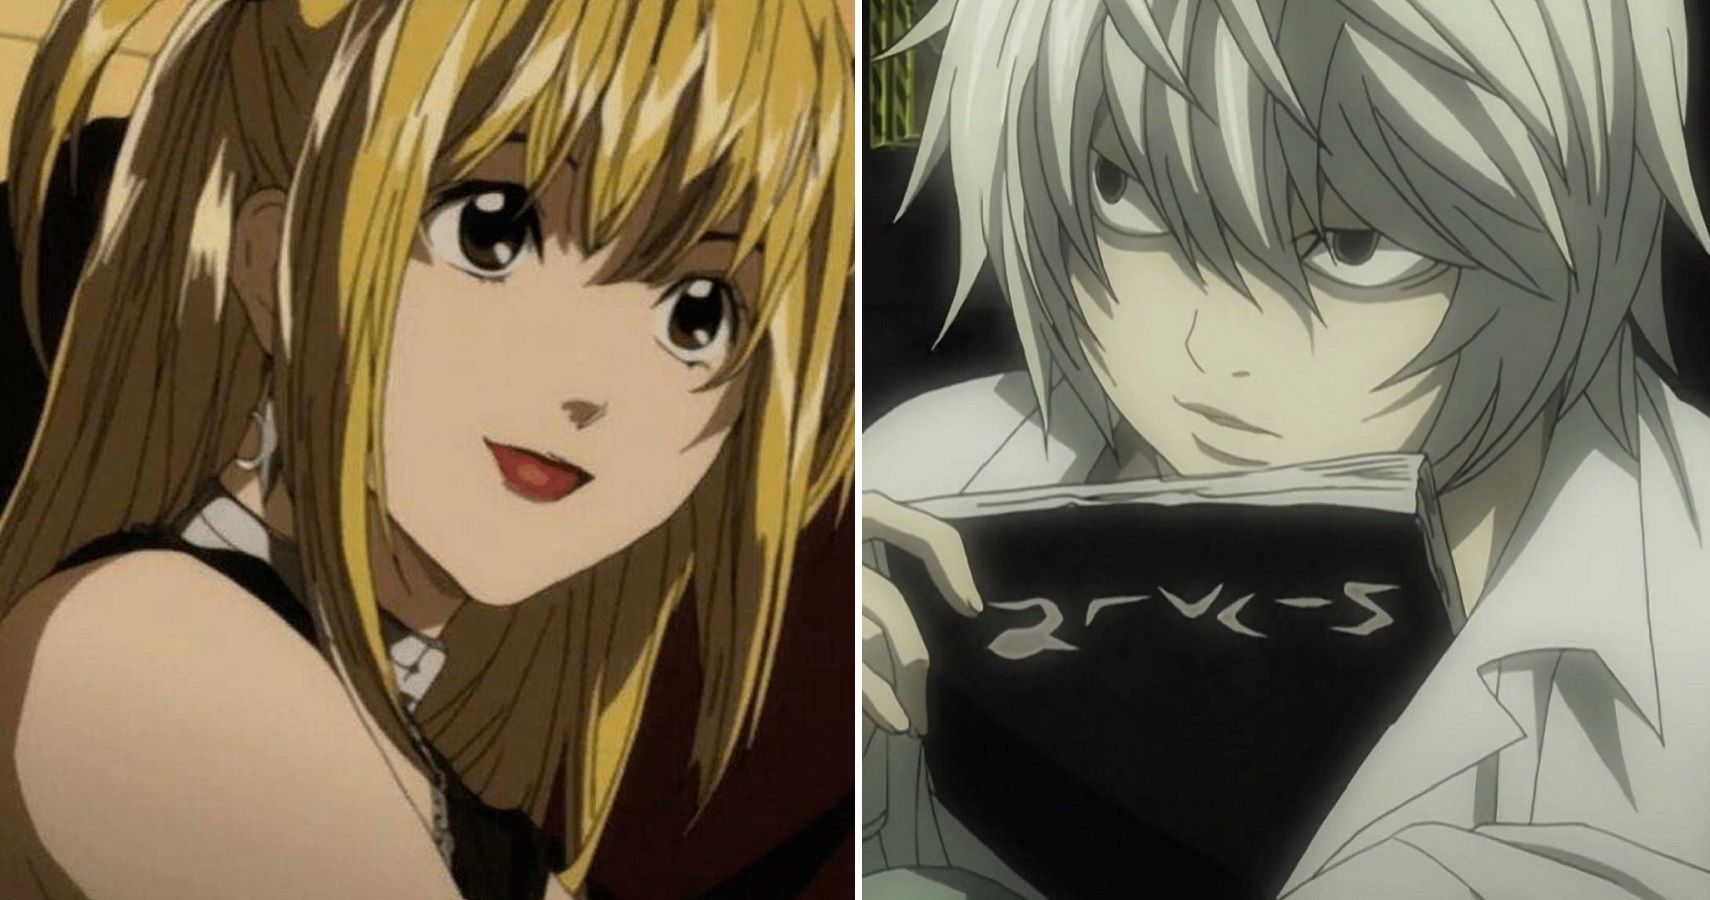 10 smartest characters in Death Note ranked based on their intelligence